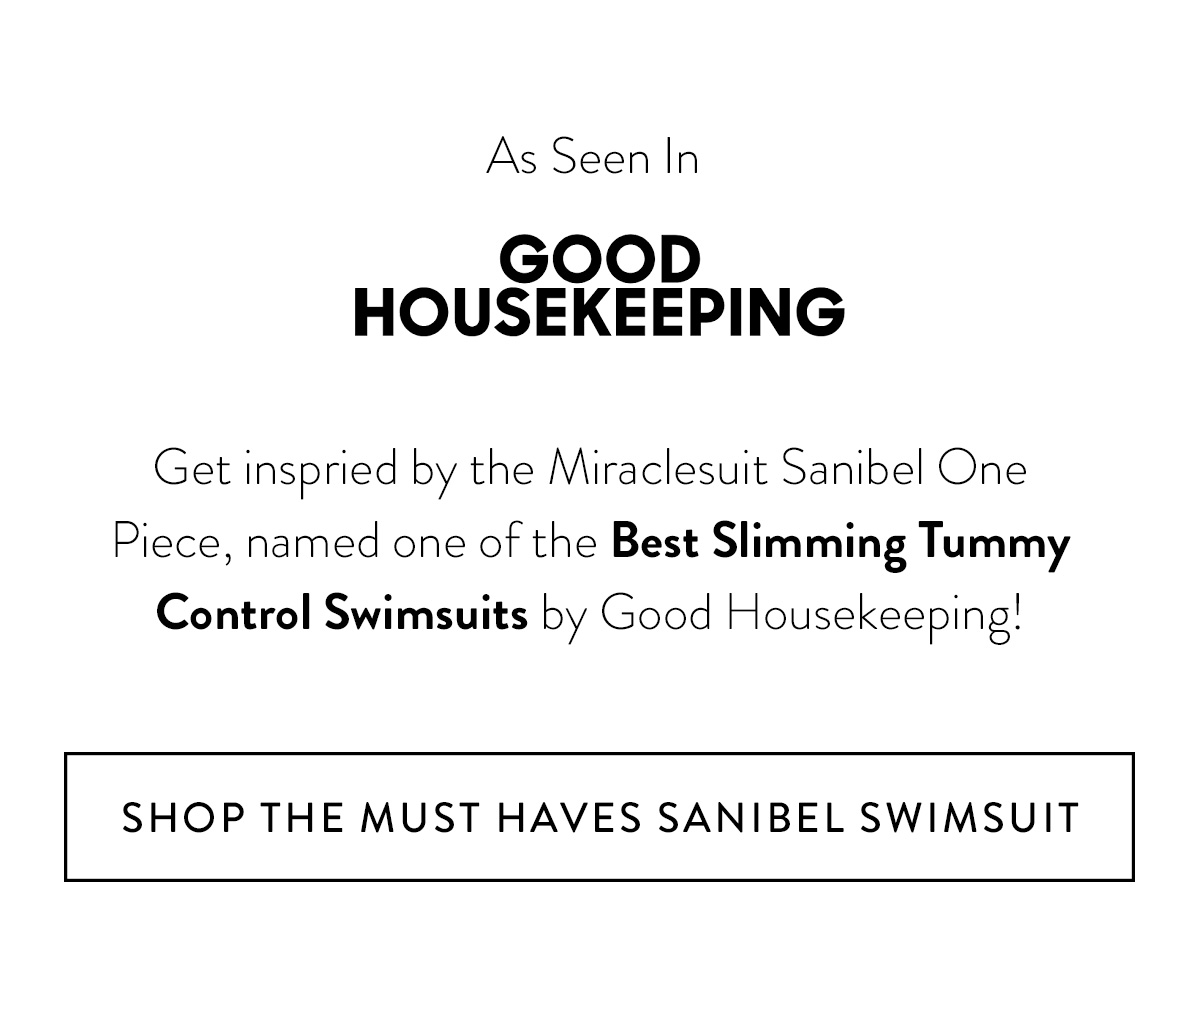 AS SEEN IN [*include Good Housekeeping logo*] Get inspried by the Miraclesuit Sanibel One Piece, named one of the Best Slimming Tummy Control Swimsuits by Good Housekeeping!